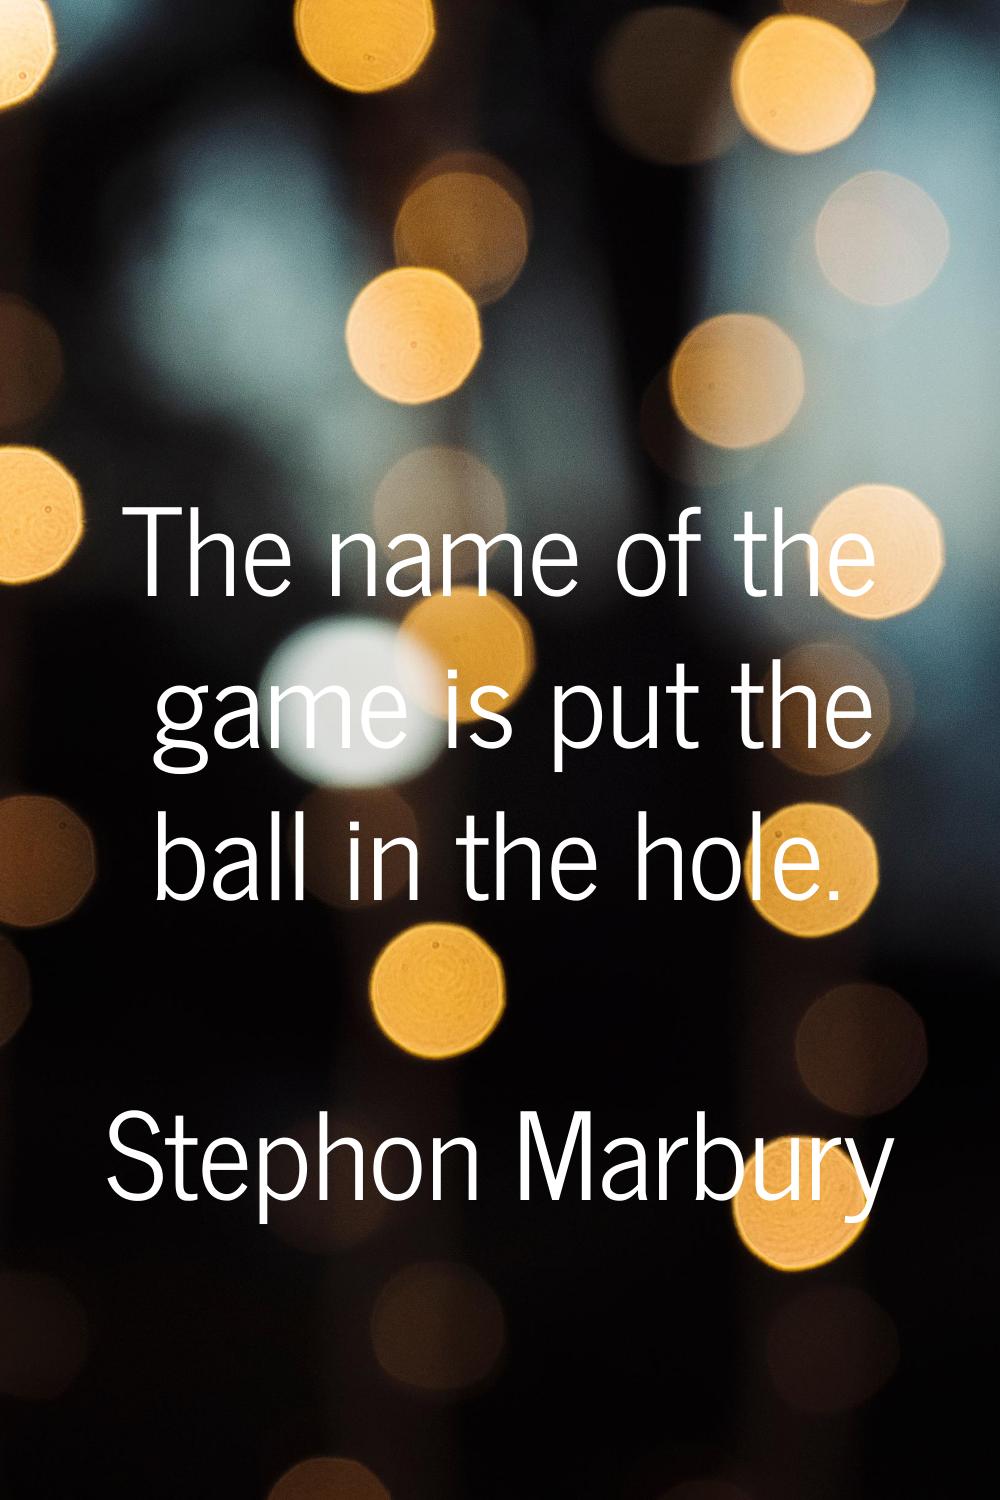 The name of the game is put the ball in the hole.